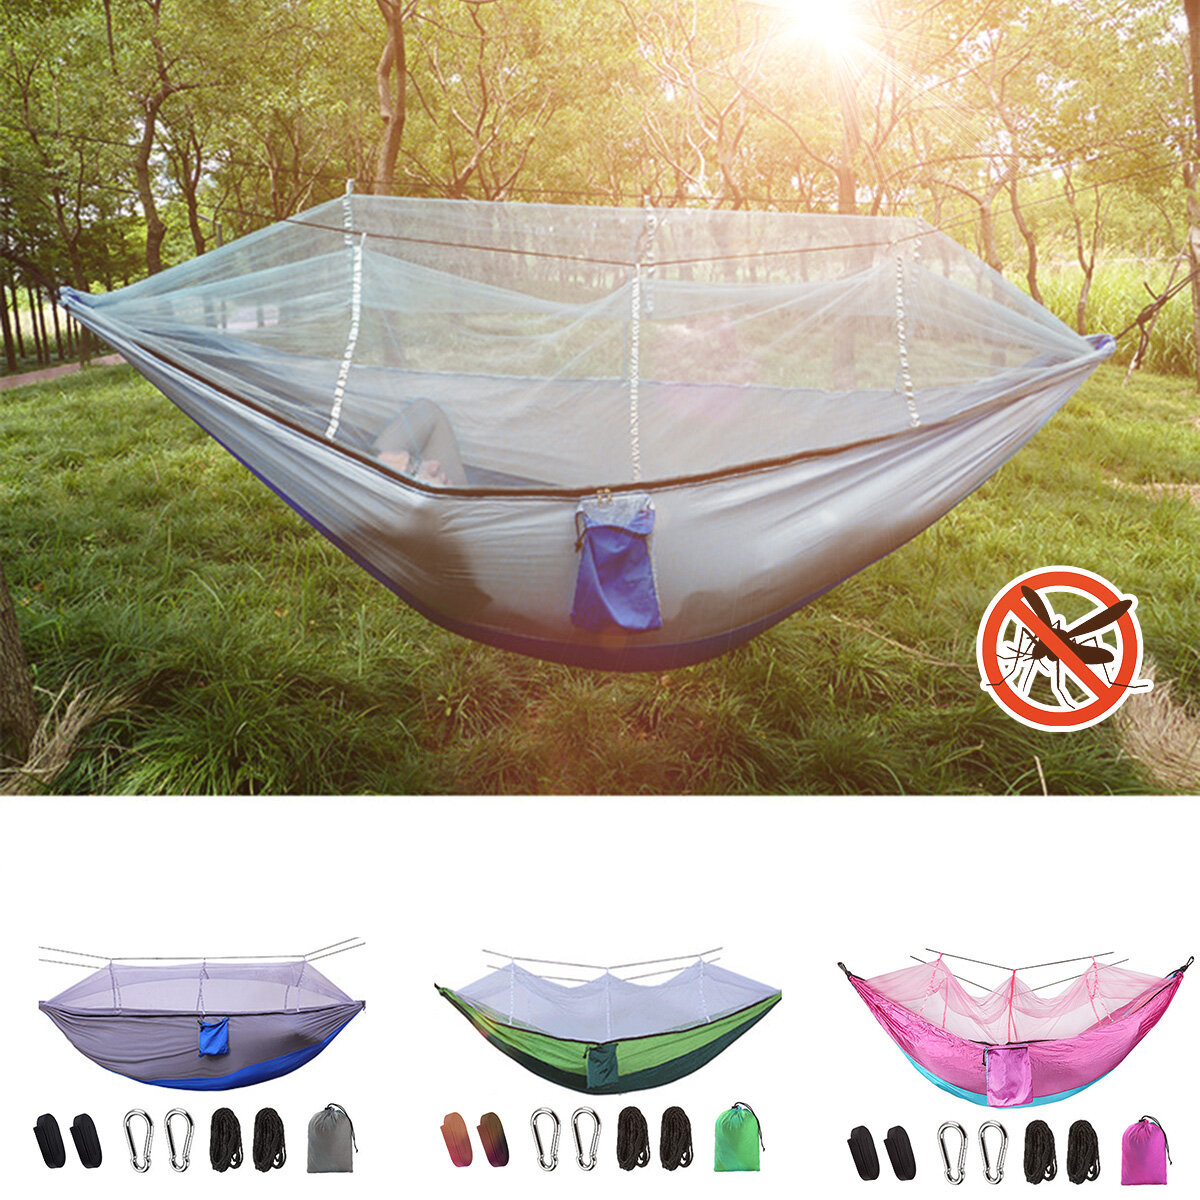 Camping Hammock Mosquito Net Double People Hanging Bed Travel Beach Hiking Swing Chair